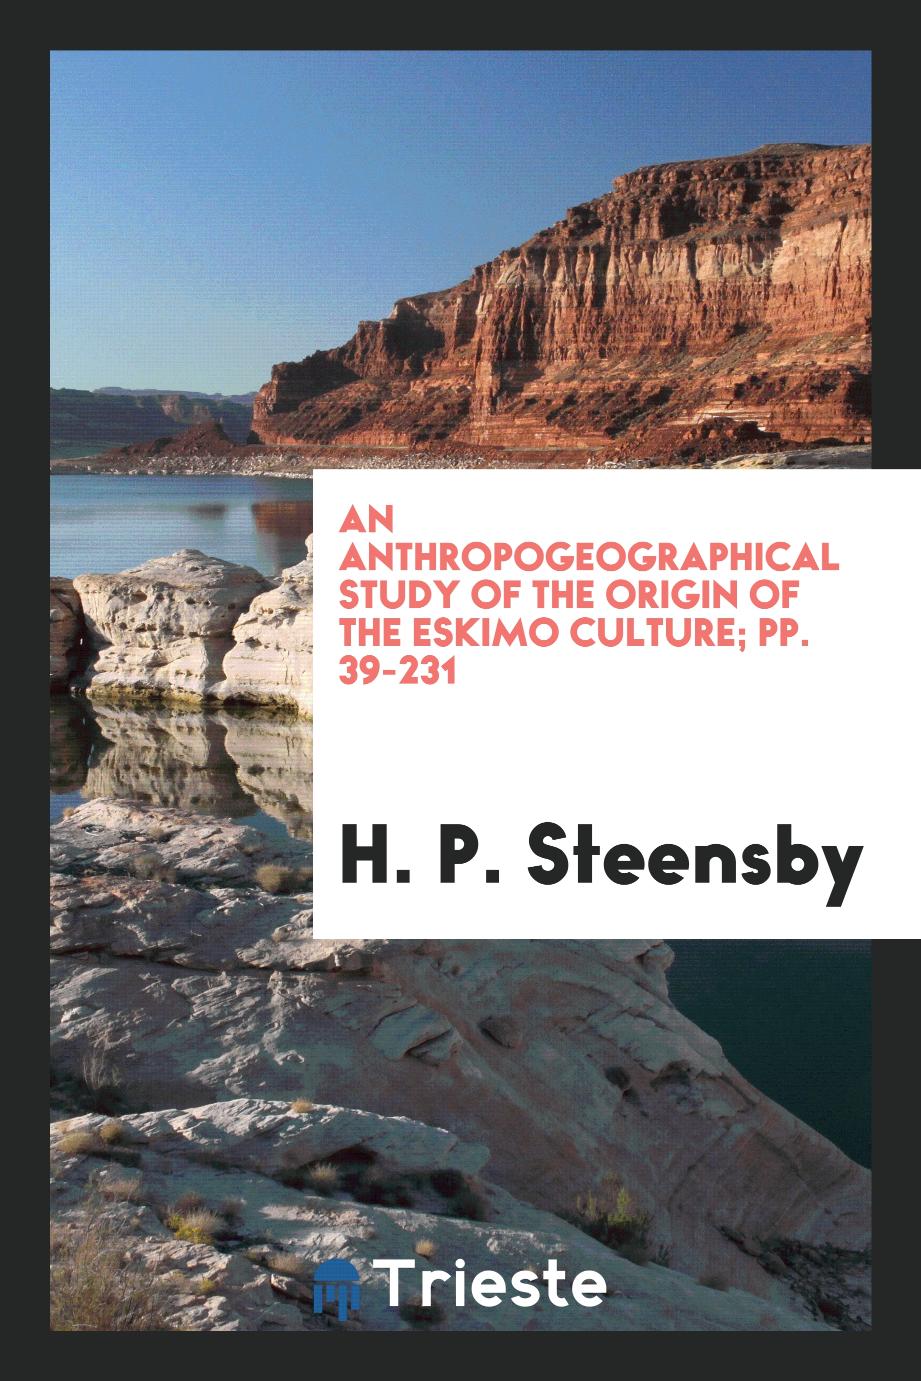 An anthropogeographical study of the origin of the Eskimo culture; pp. 39-231